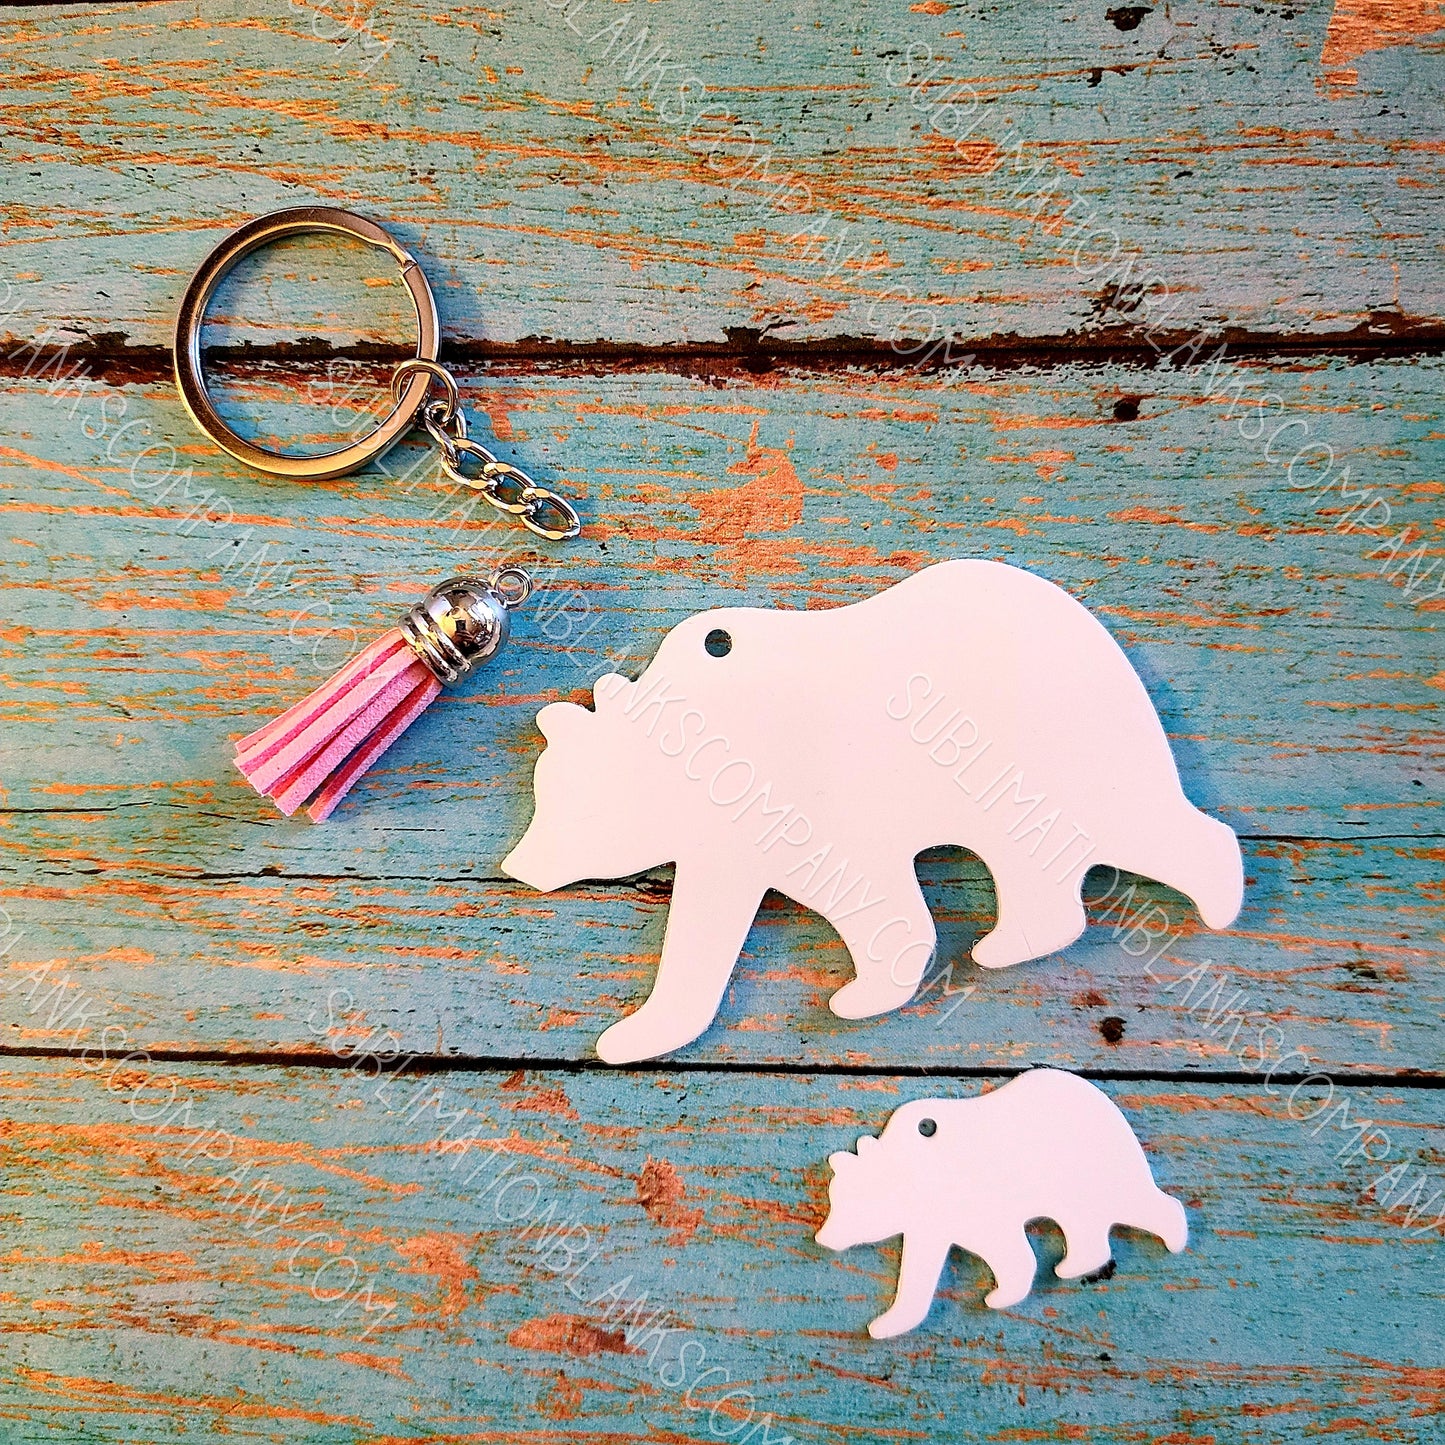 Mama Bear with Tassel and Baby Bear Aluminum Keychain with Key Ring Sublimation Blank. Laserable!